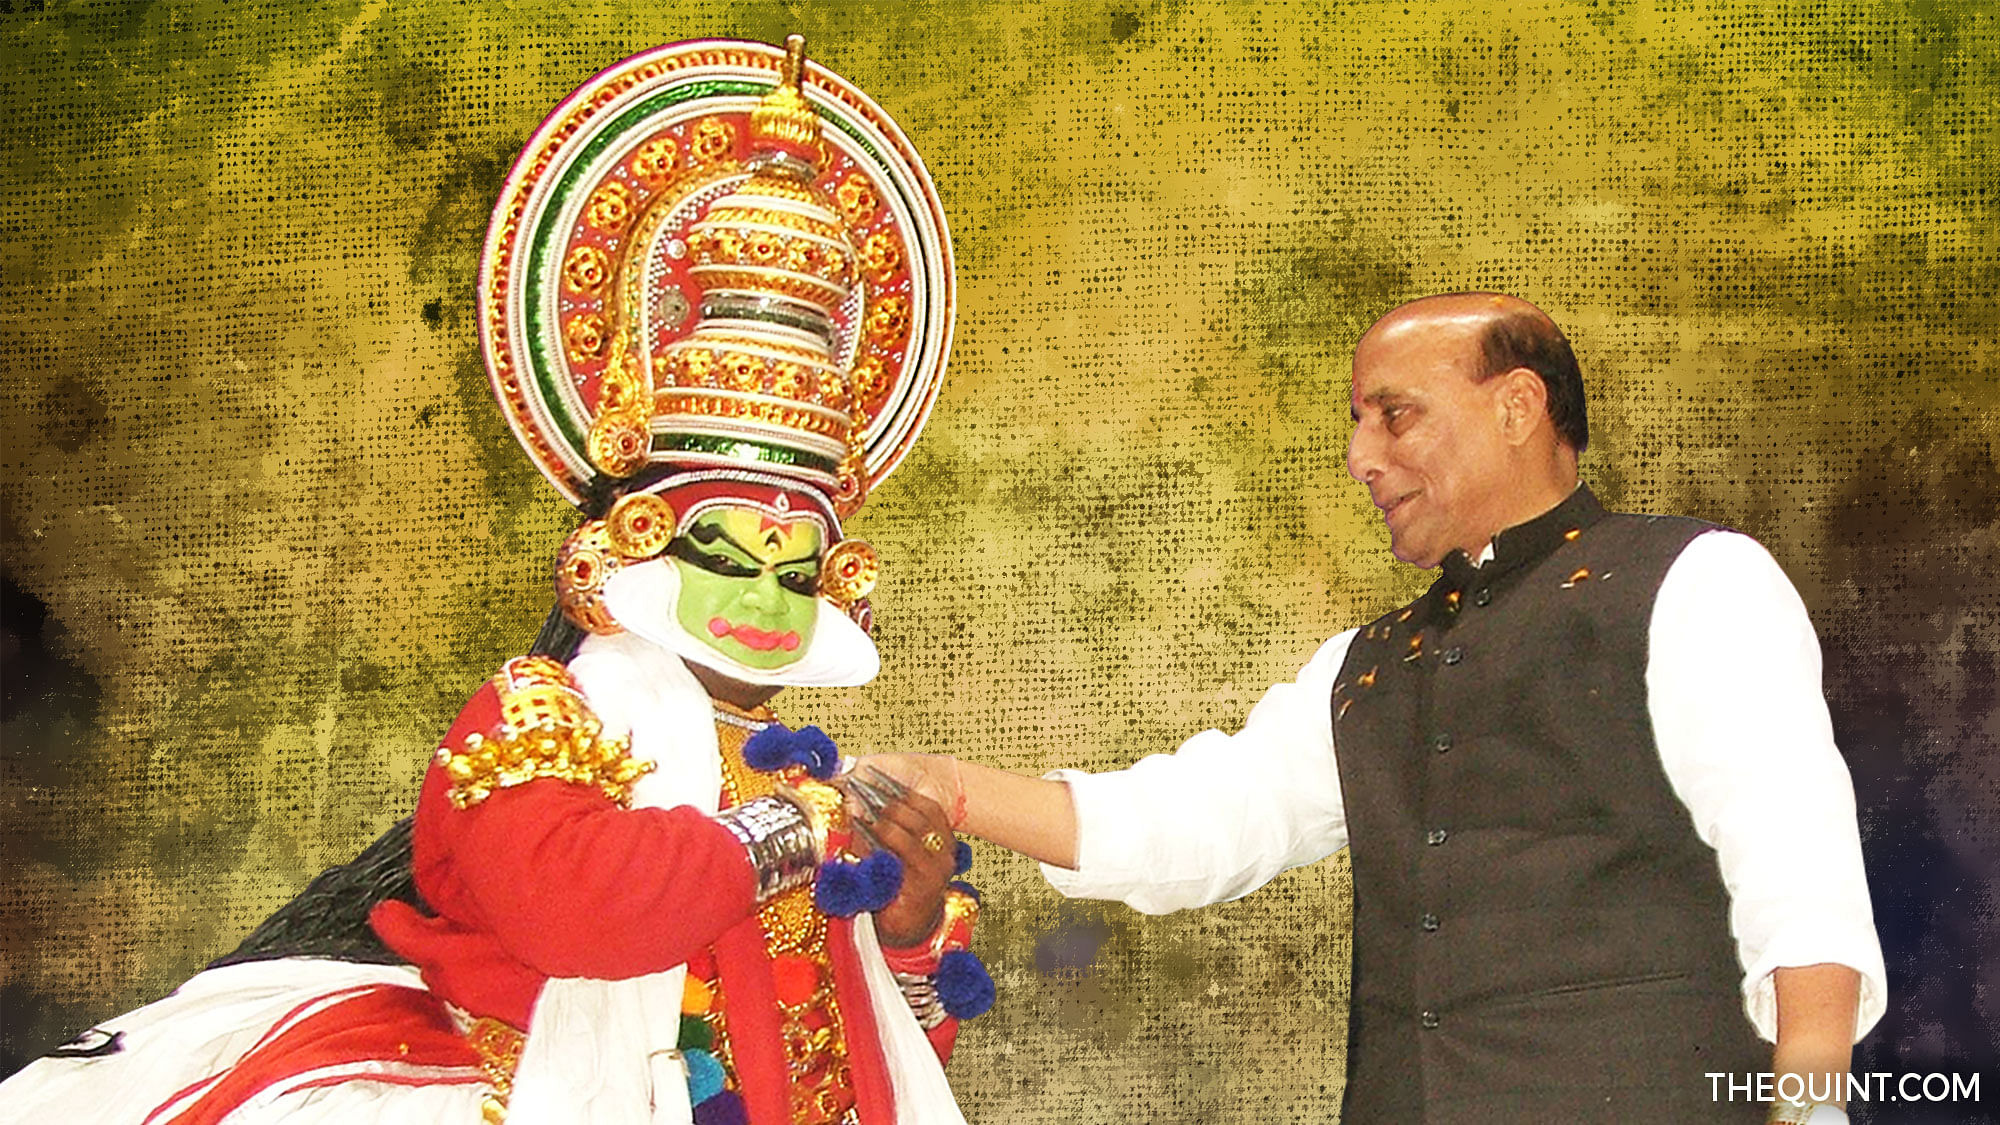 File photo of Rajnath Singh participating in Pongal celebrations organised by the BJP South Indian cell. (Photo: <a href="http://www.bjp.org/component/joomgallery/2013/january/bjp-national-president-shri-rajnath-singh-and-shri-m-venkaiah-naidu-at-pongal-and-sankranti-celebration-organised-by-bjp-south-indian-cell-at-talkatora-stadium-on-january-27-2013/bjp-national-president-shri-rajnath-singh-and-shri-m-venkaiah-naidu-at-pongal-and-sankranti-celebration-organised-by-bjp-south-indian-cell-at-talkatora-stadium-on-january-27-2013-20038">bjp.org</a>/ Altered by <b>The Quint</b>)